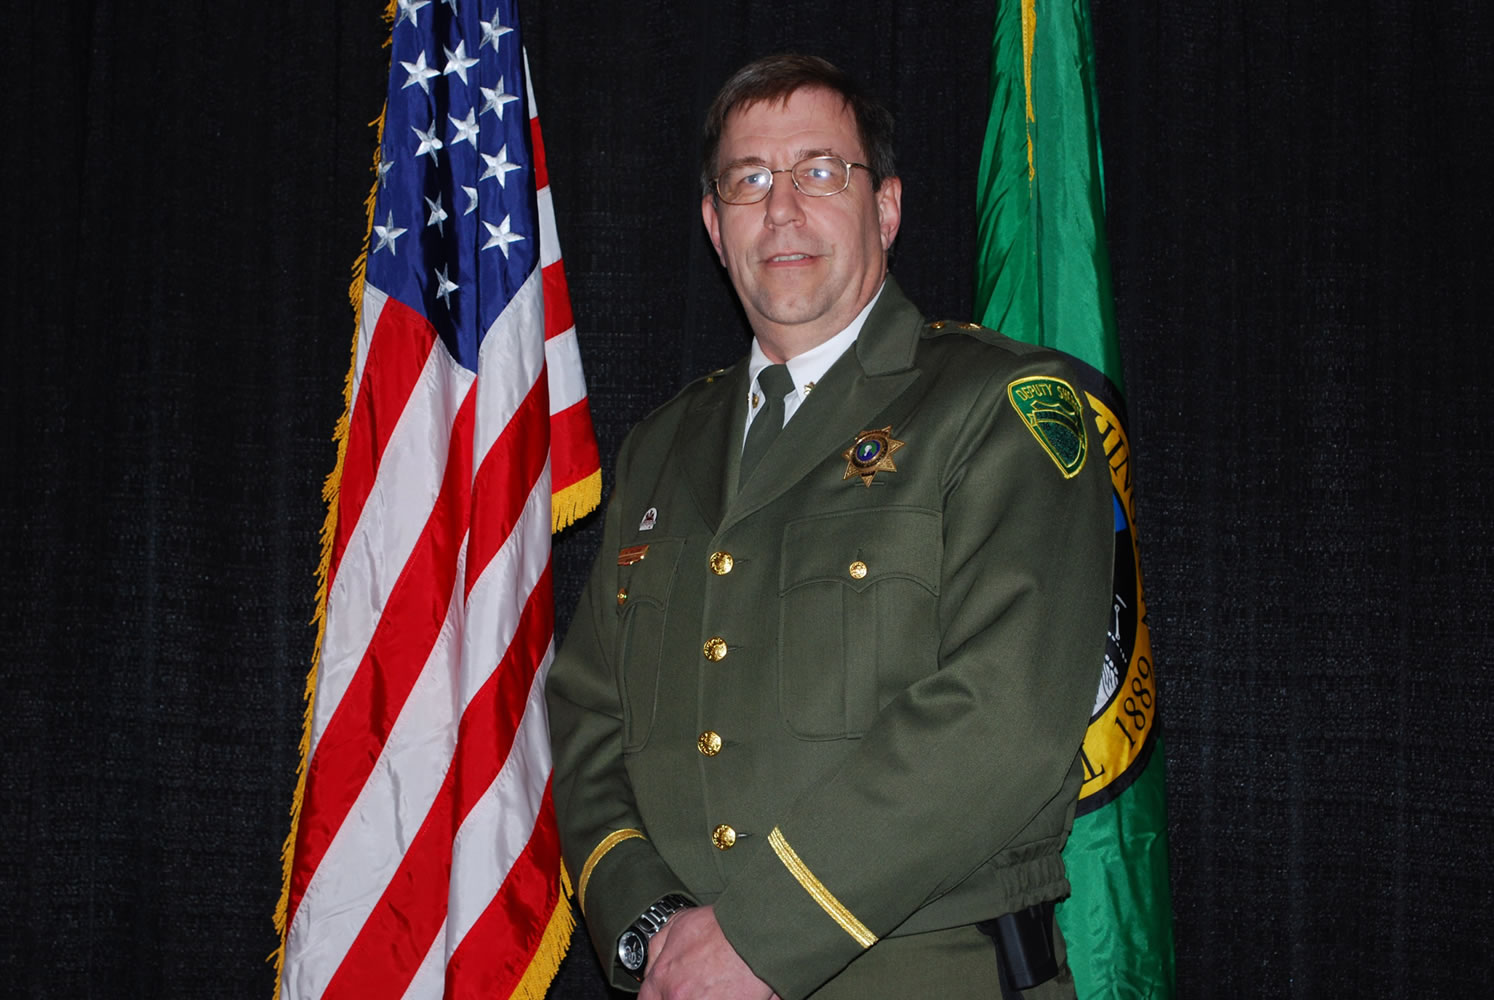 Keith Kilian was Named chief of police in Lincoln City, Ore.